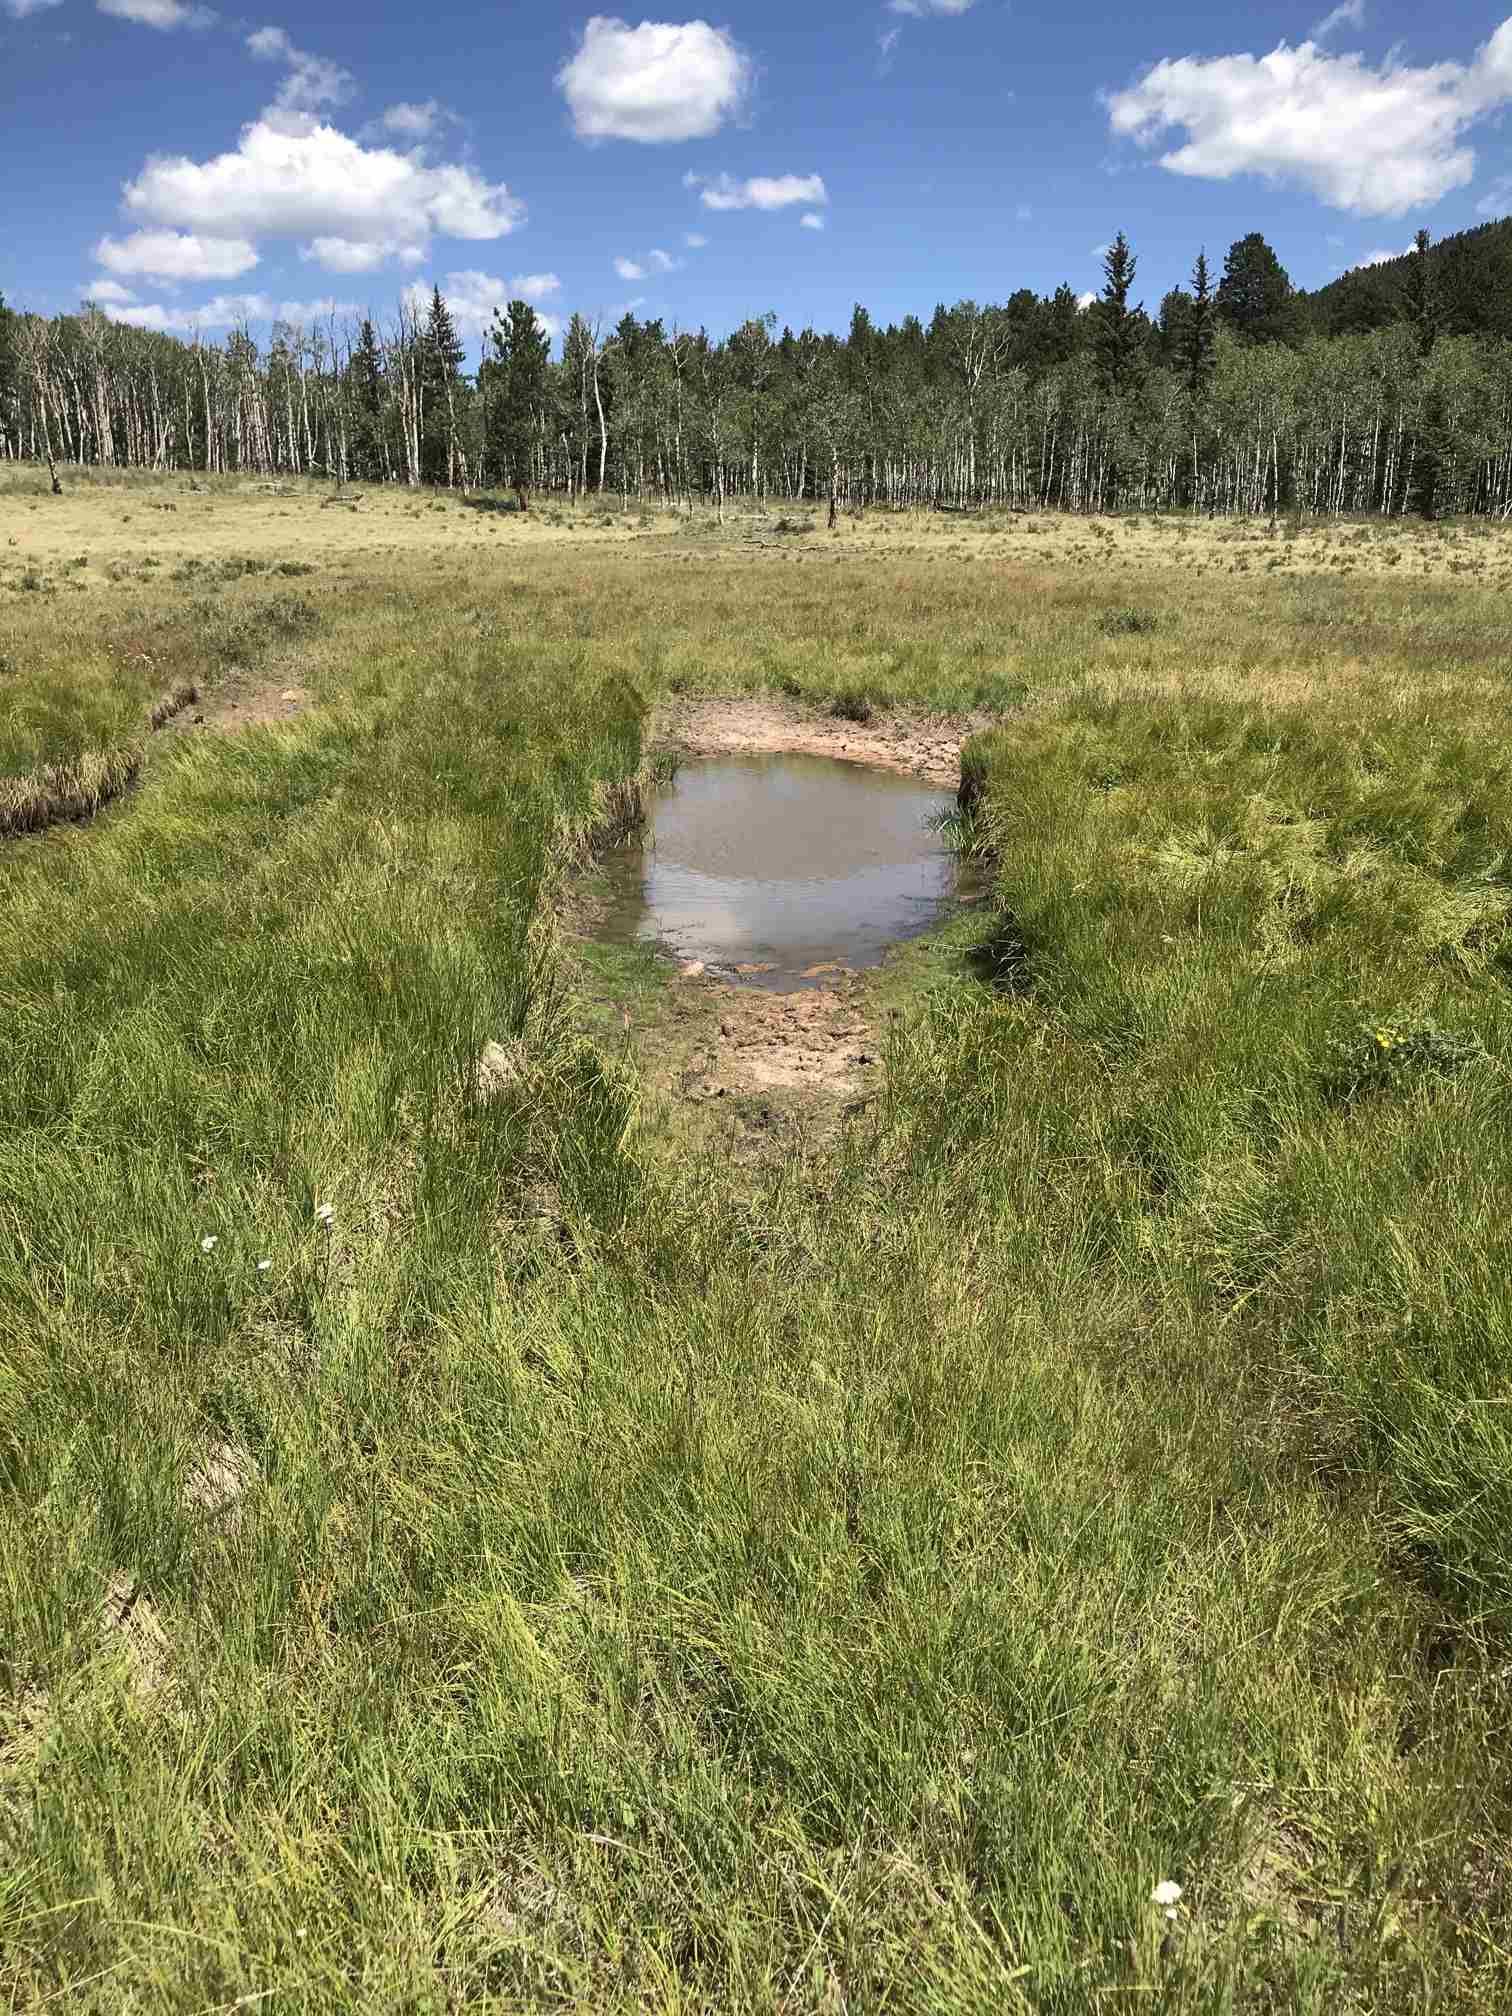 Small pond in a large green meadow with pine forest in background